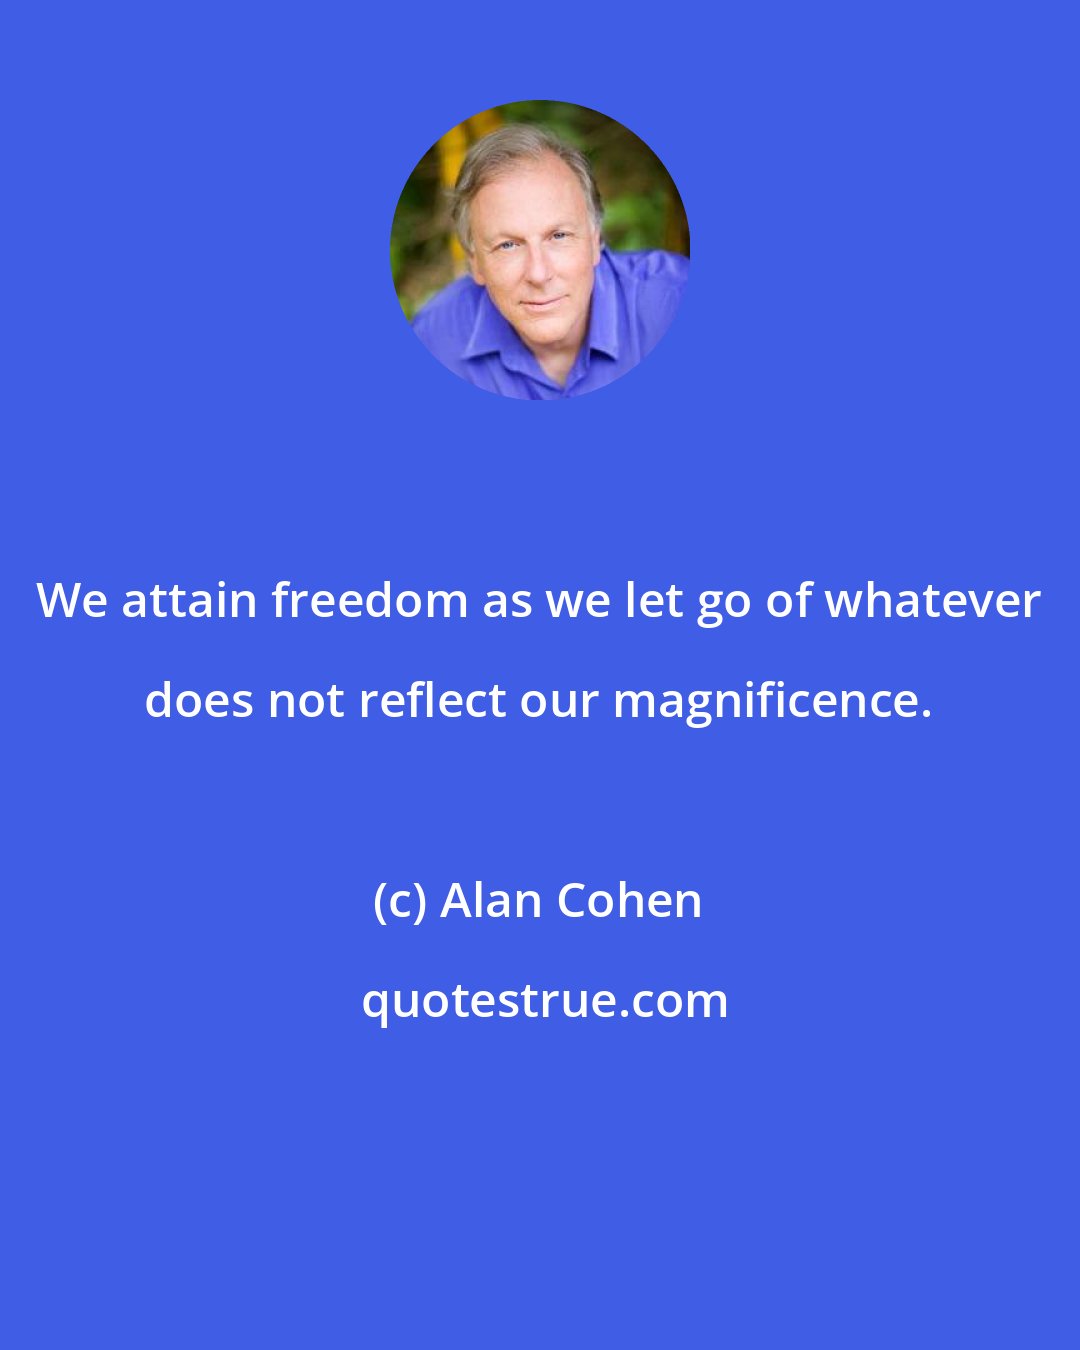 Alan Cohen: We attain freedom as we let go of whatever does not reflect our magnificence.